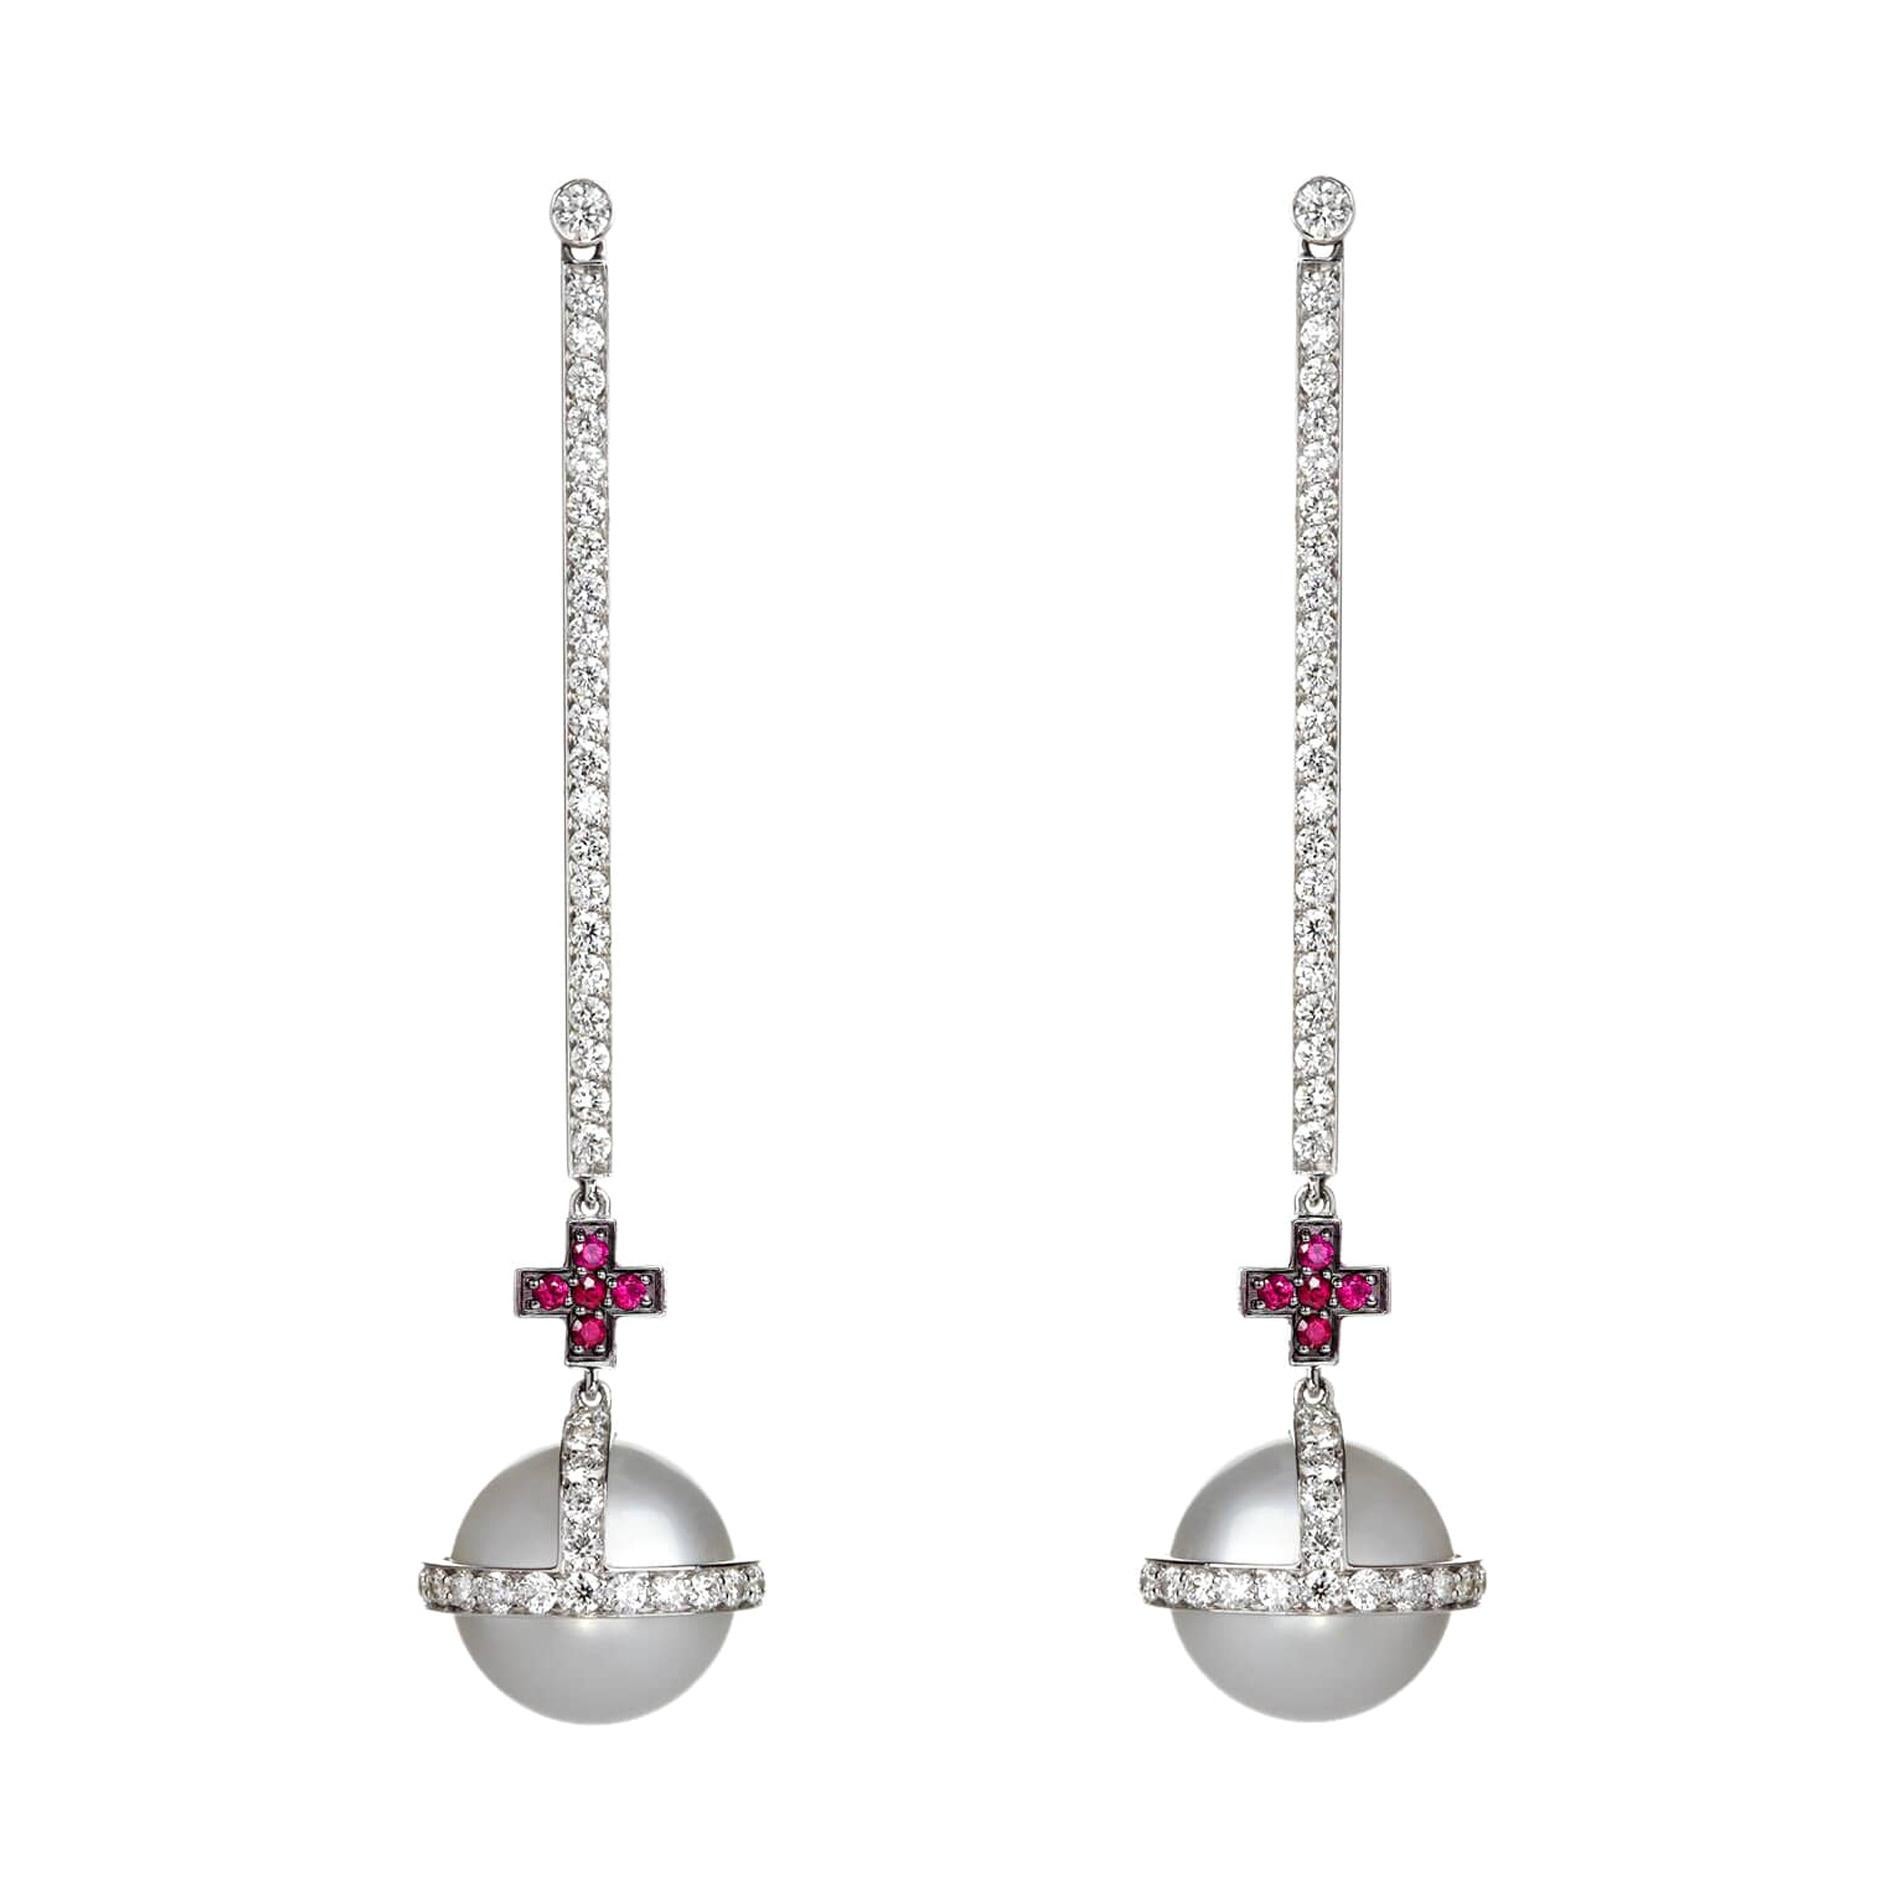 Sybarite Sceptre Drop Cross Earrings in White Gold with White Diamonds & Rubies For Sale